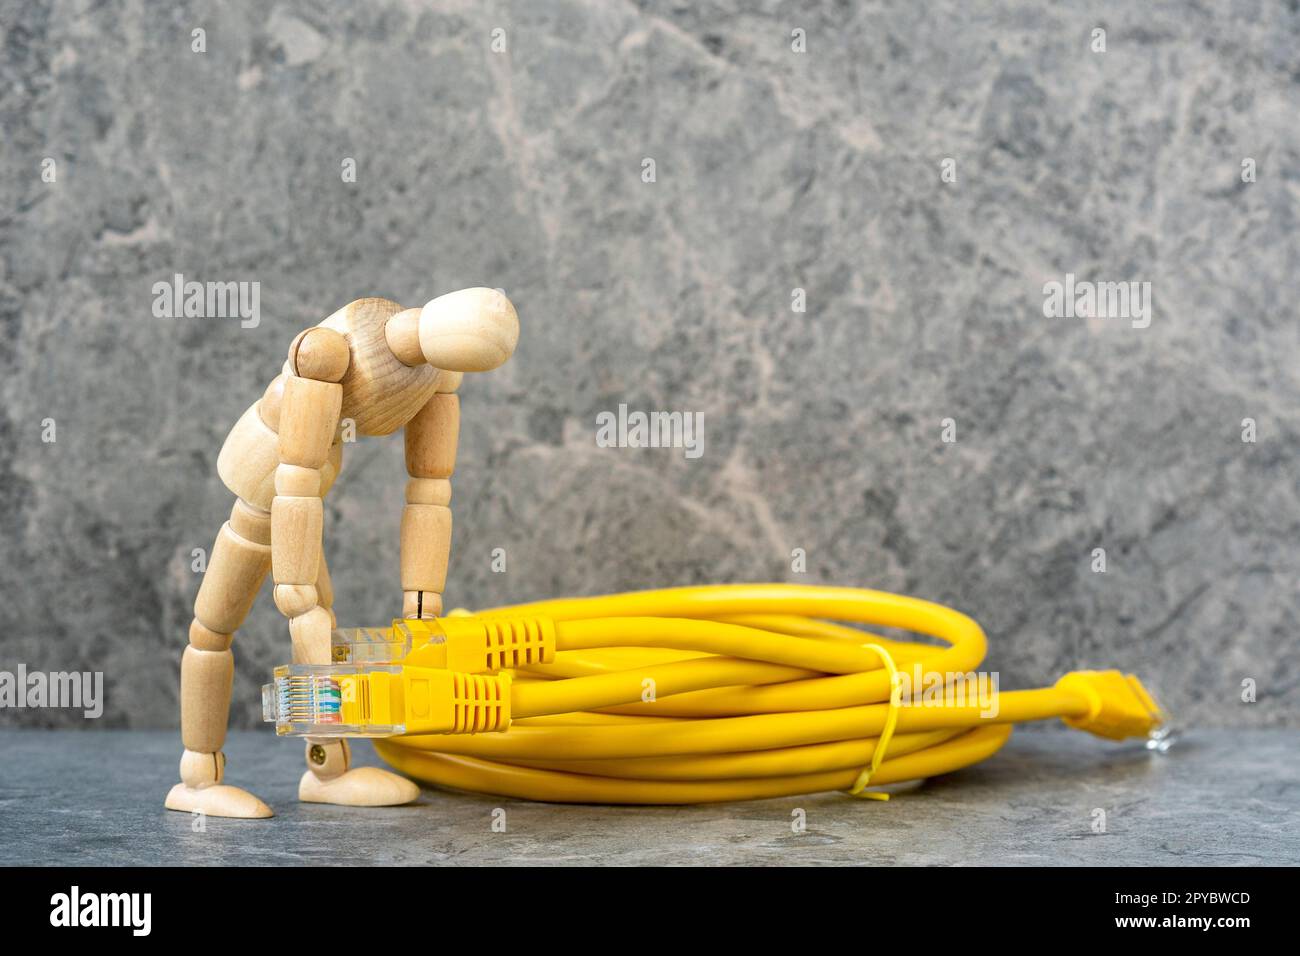 Concept of network troubleshoot supporter or administrator Stock Photo